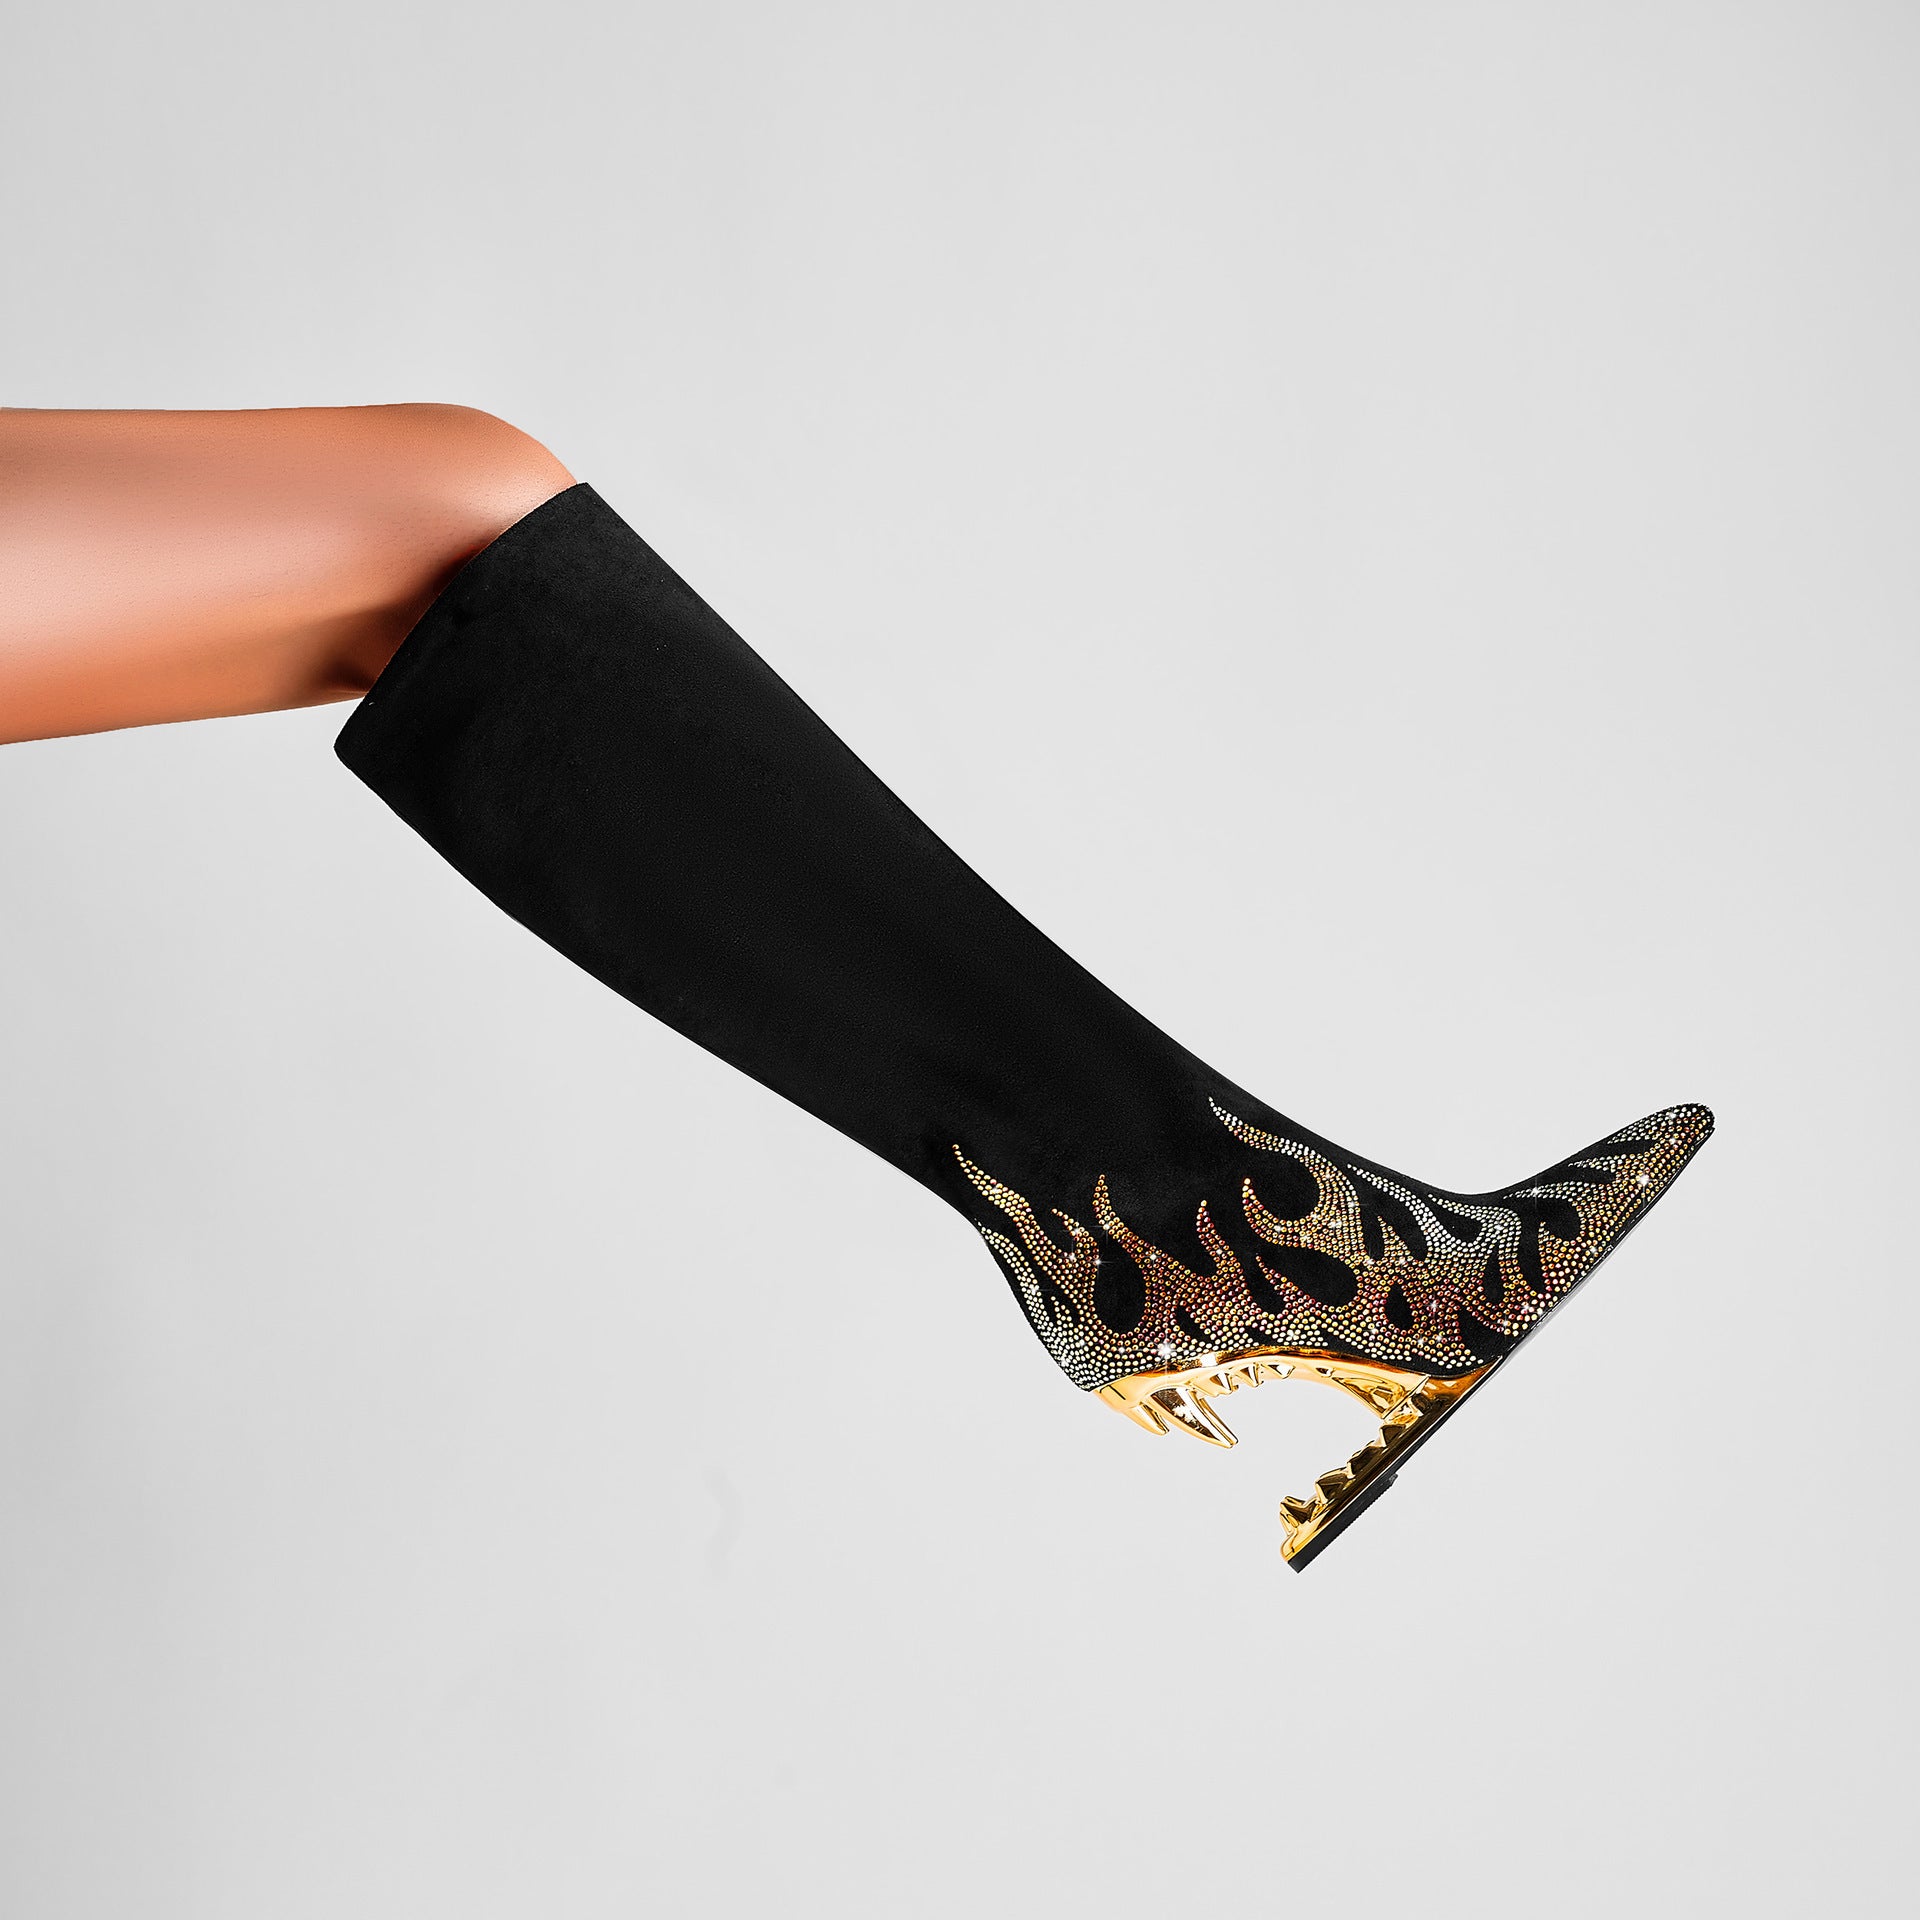 FireStride - Rhinestone Flame Tiger Tooth Heel Boots